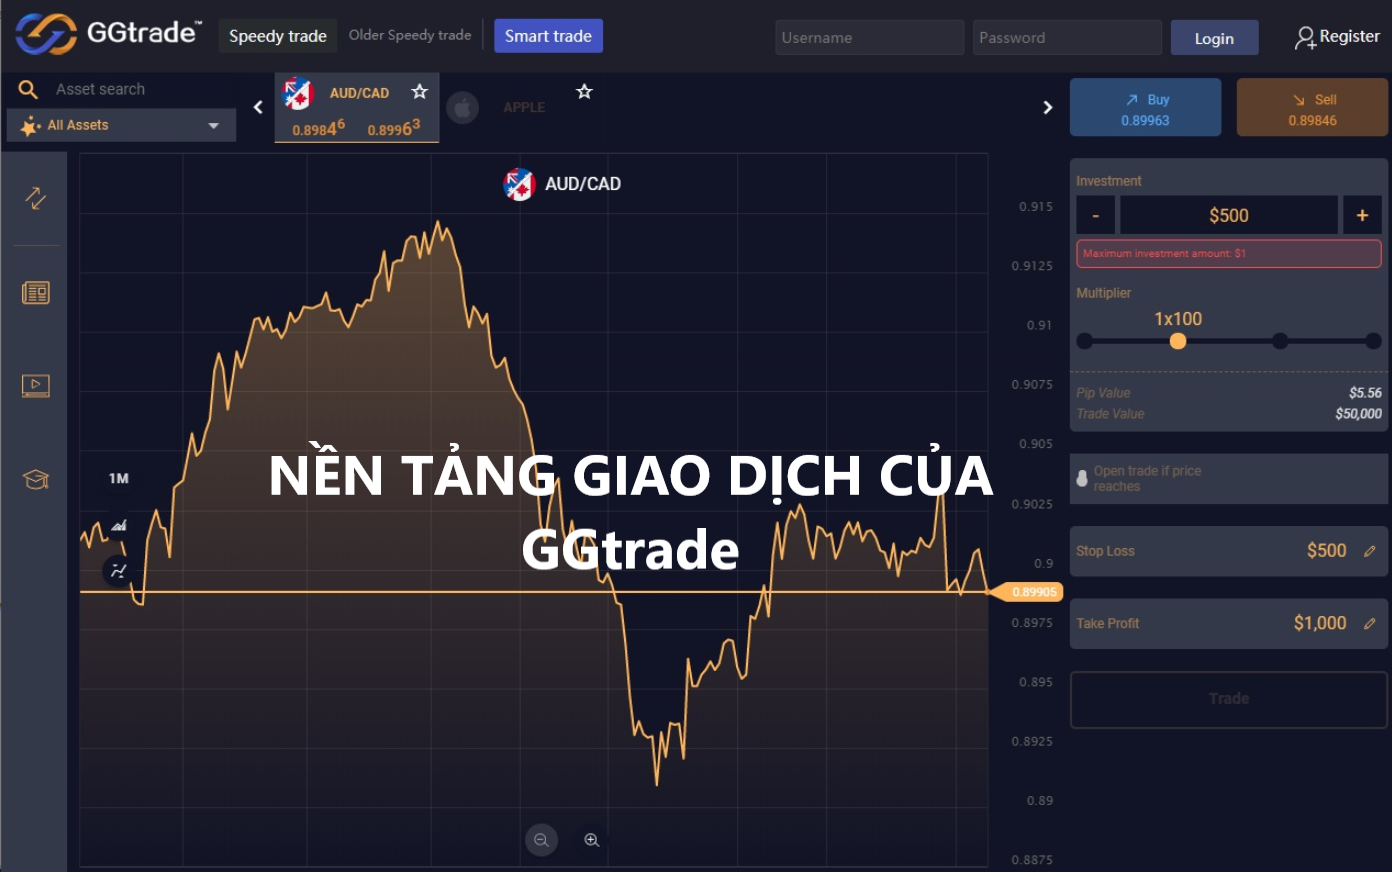 Nền tảng giao dịch của GGtrader